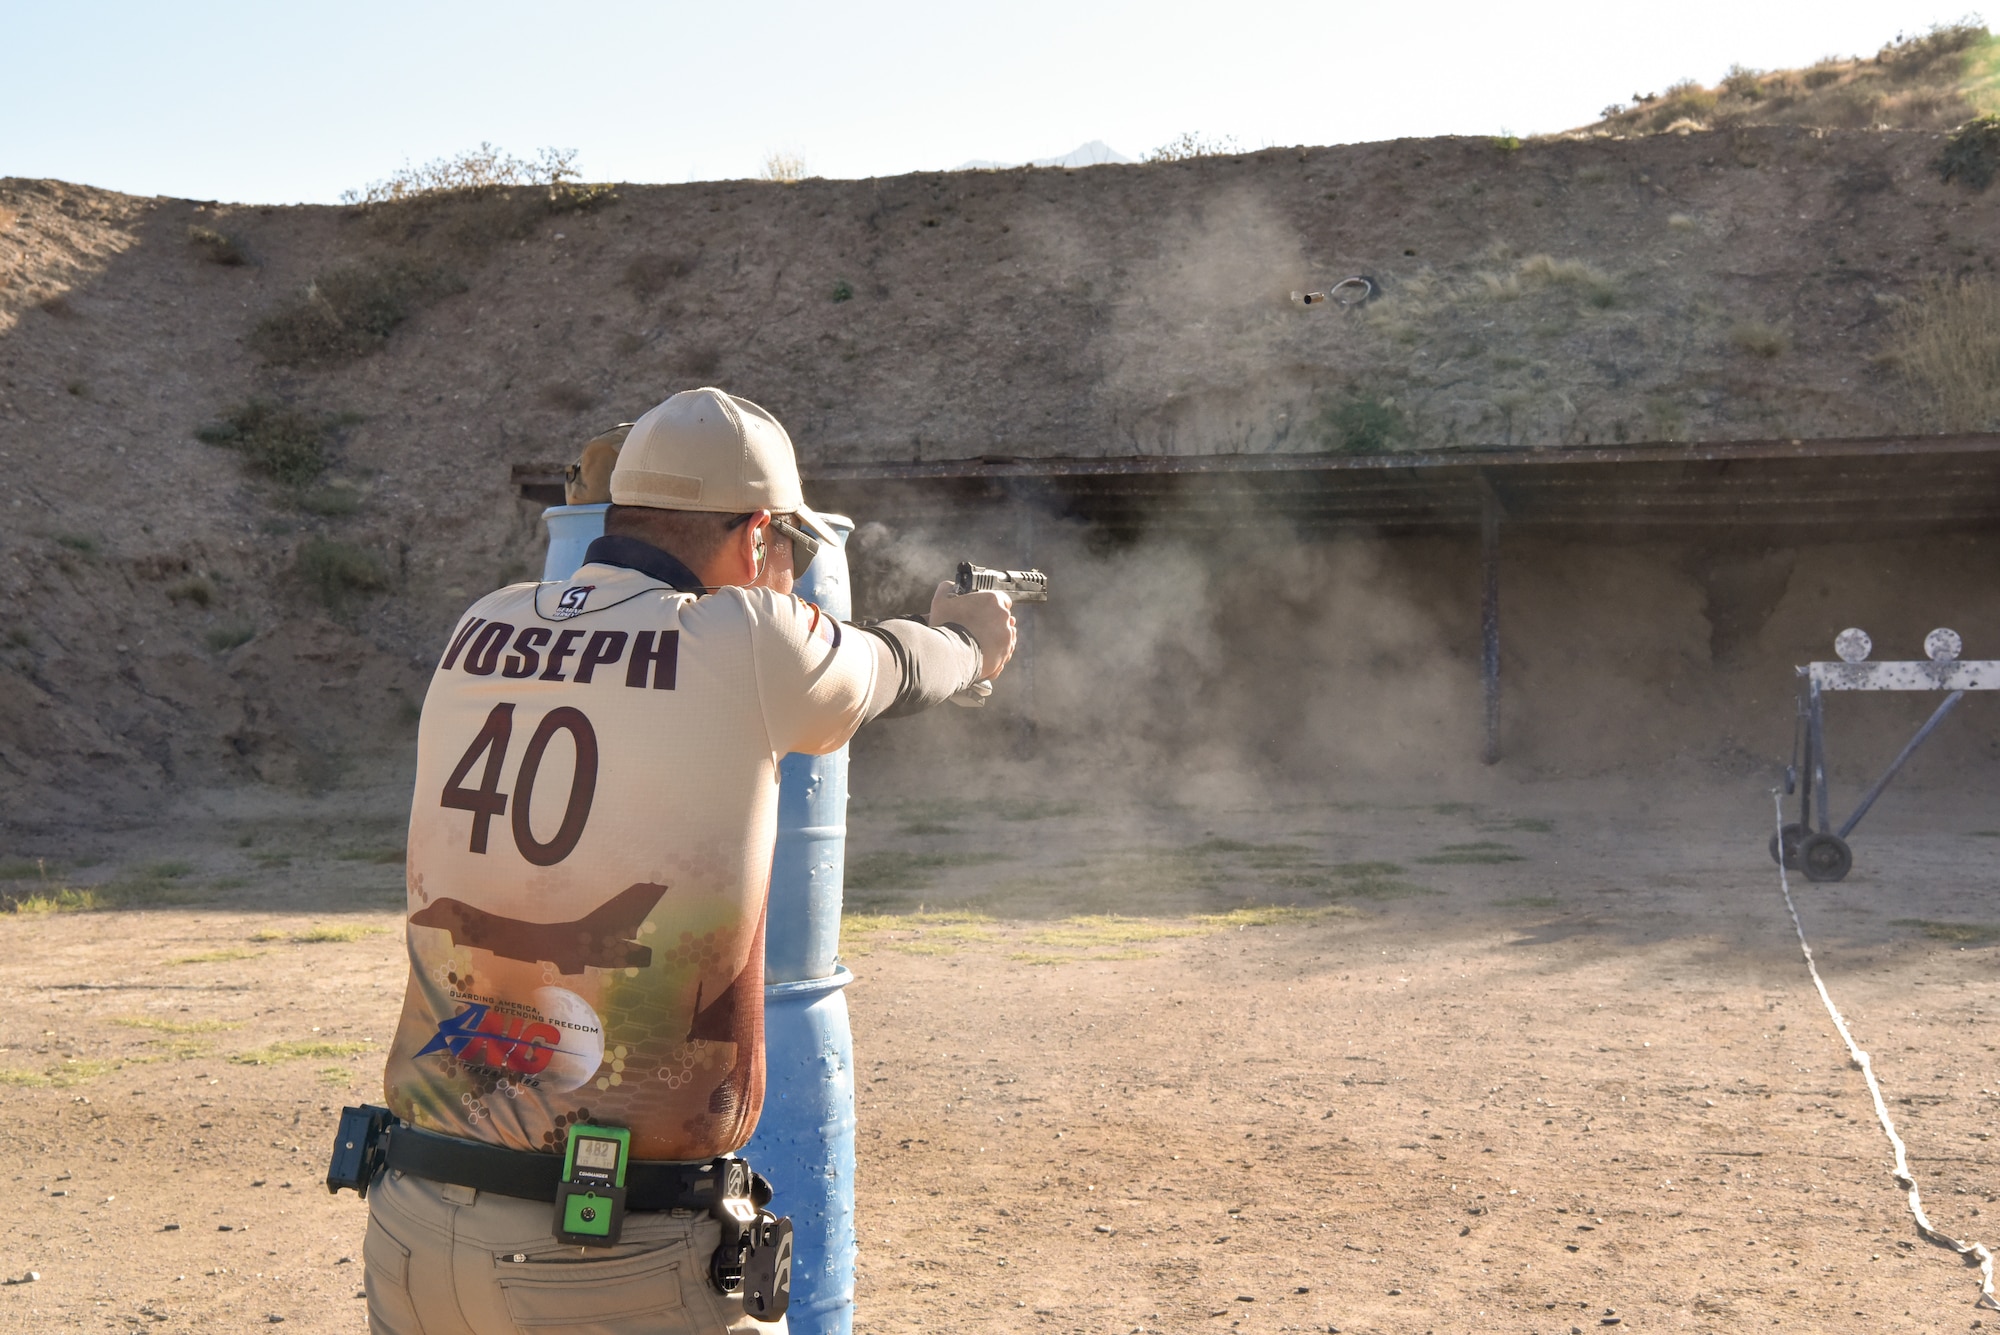 Captain Jaminh Vo, 162nd Wing Arizona Air National Guard Aviation Maintenance Officer, trains for his upcoming National Pistol Shooting Association, National Championship competition near Oro Valley, AZ, October 19, 2021. (U.S. Air Force photo by Staff Sgt. Van Whatcott)